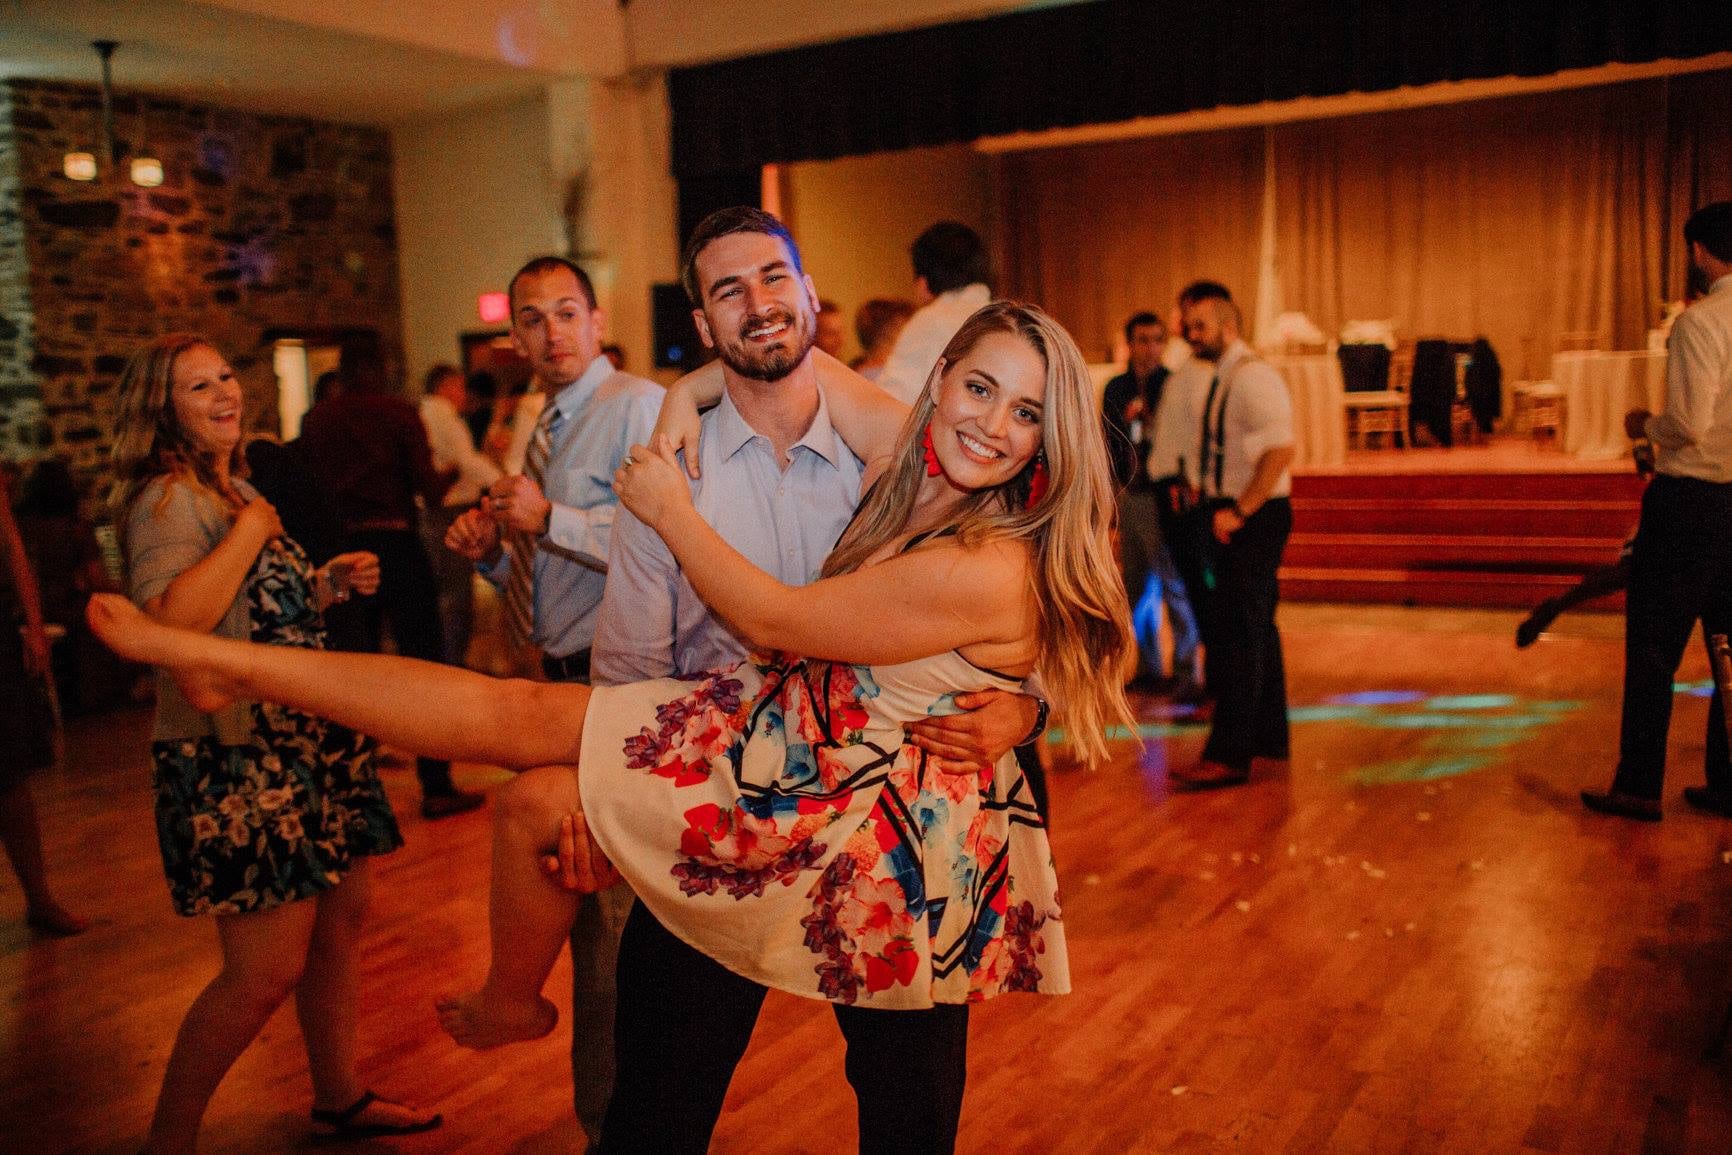 woman wearing a dress and woman a button down shirt and pants pose for a picture as the man picks her up on the dance floor at an event